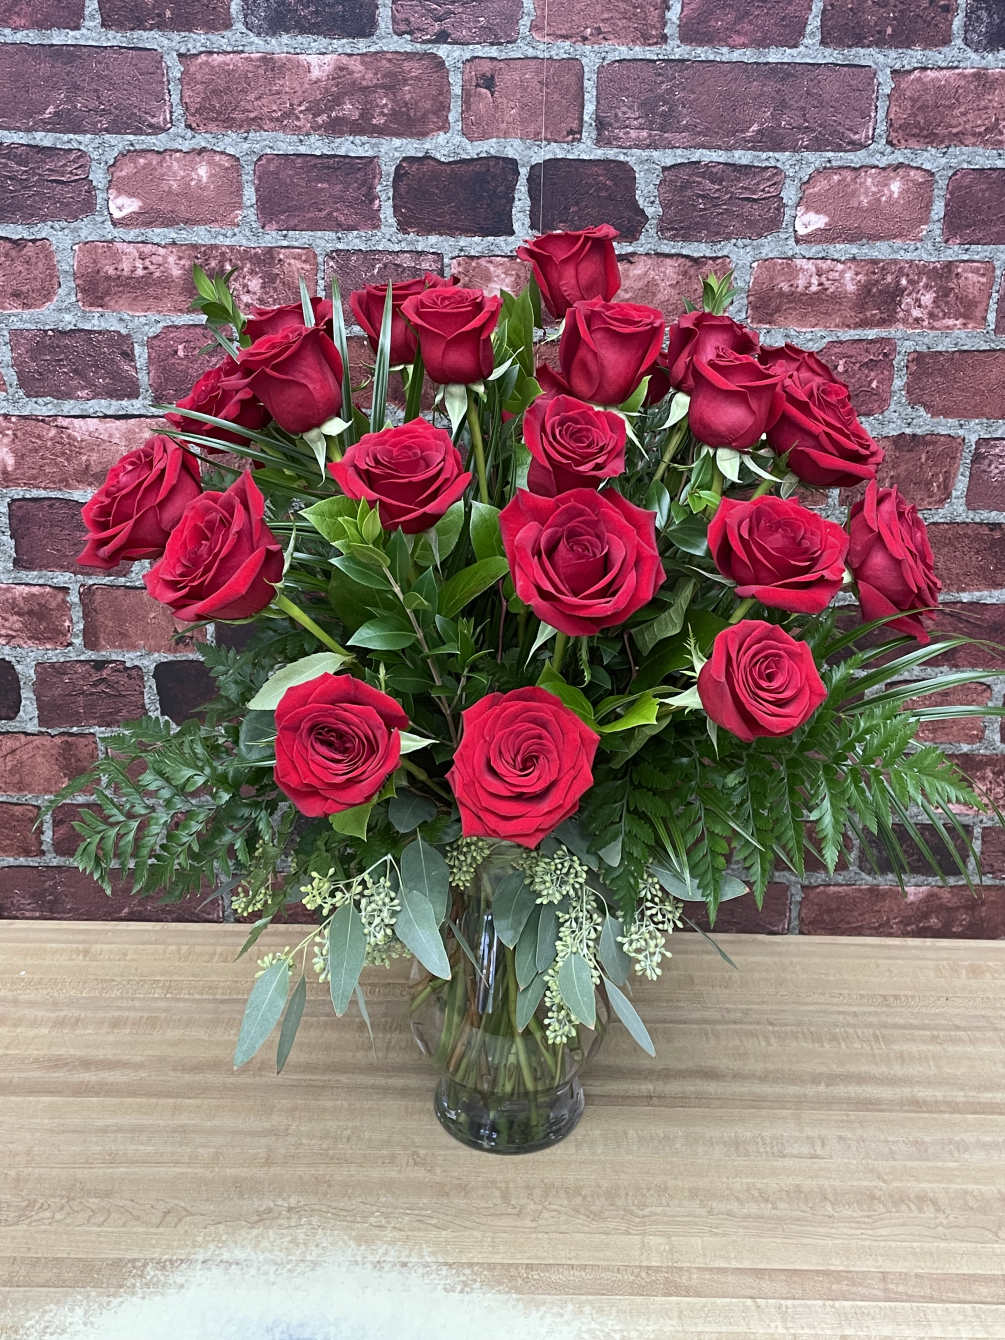 2 dozen stunning red roses arranged in a glass vase accented with